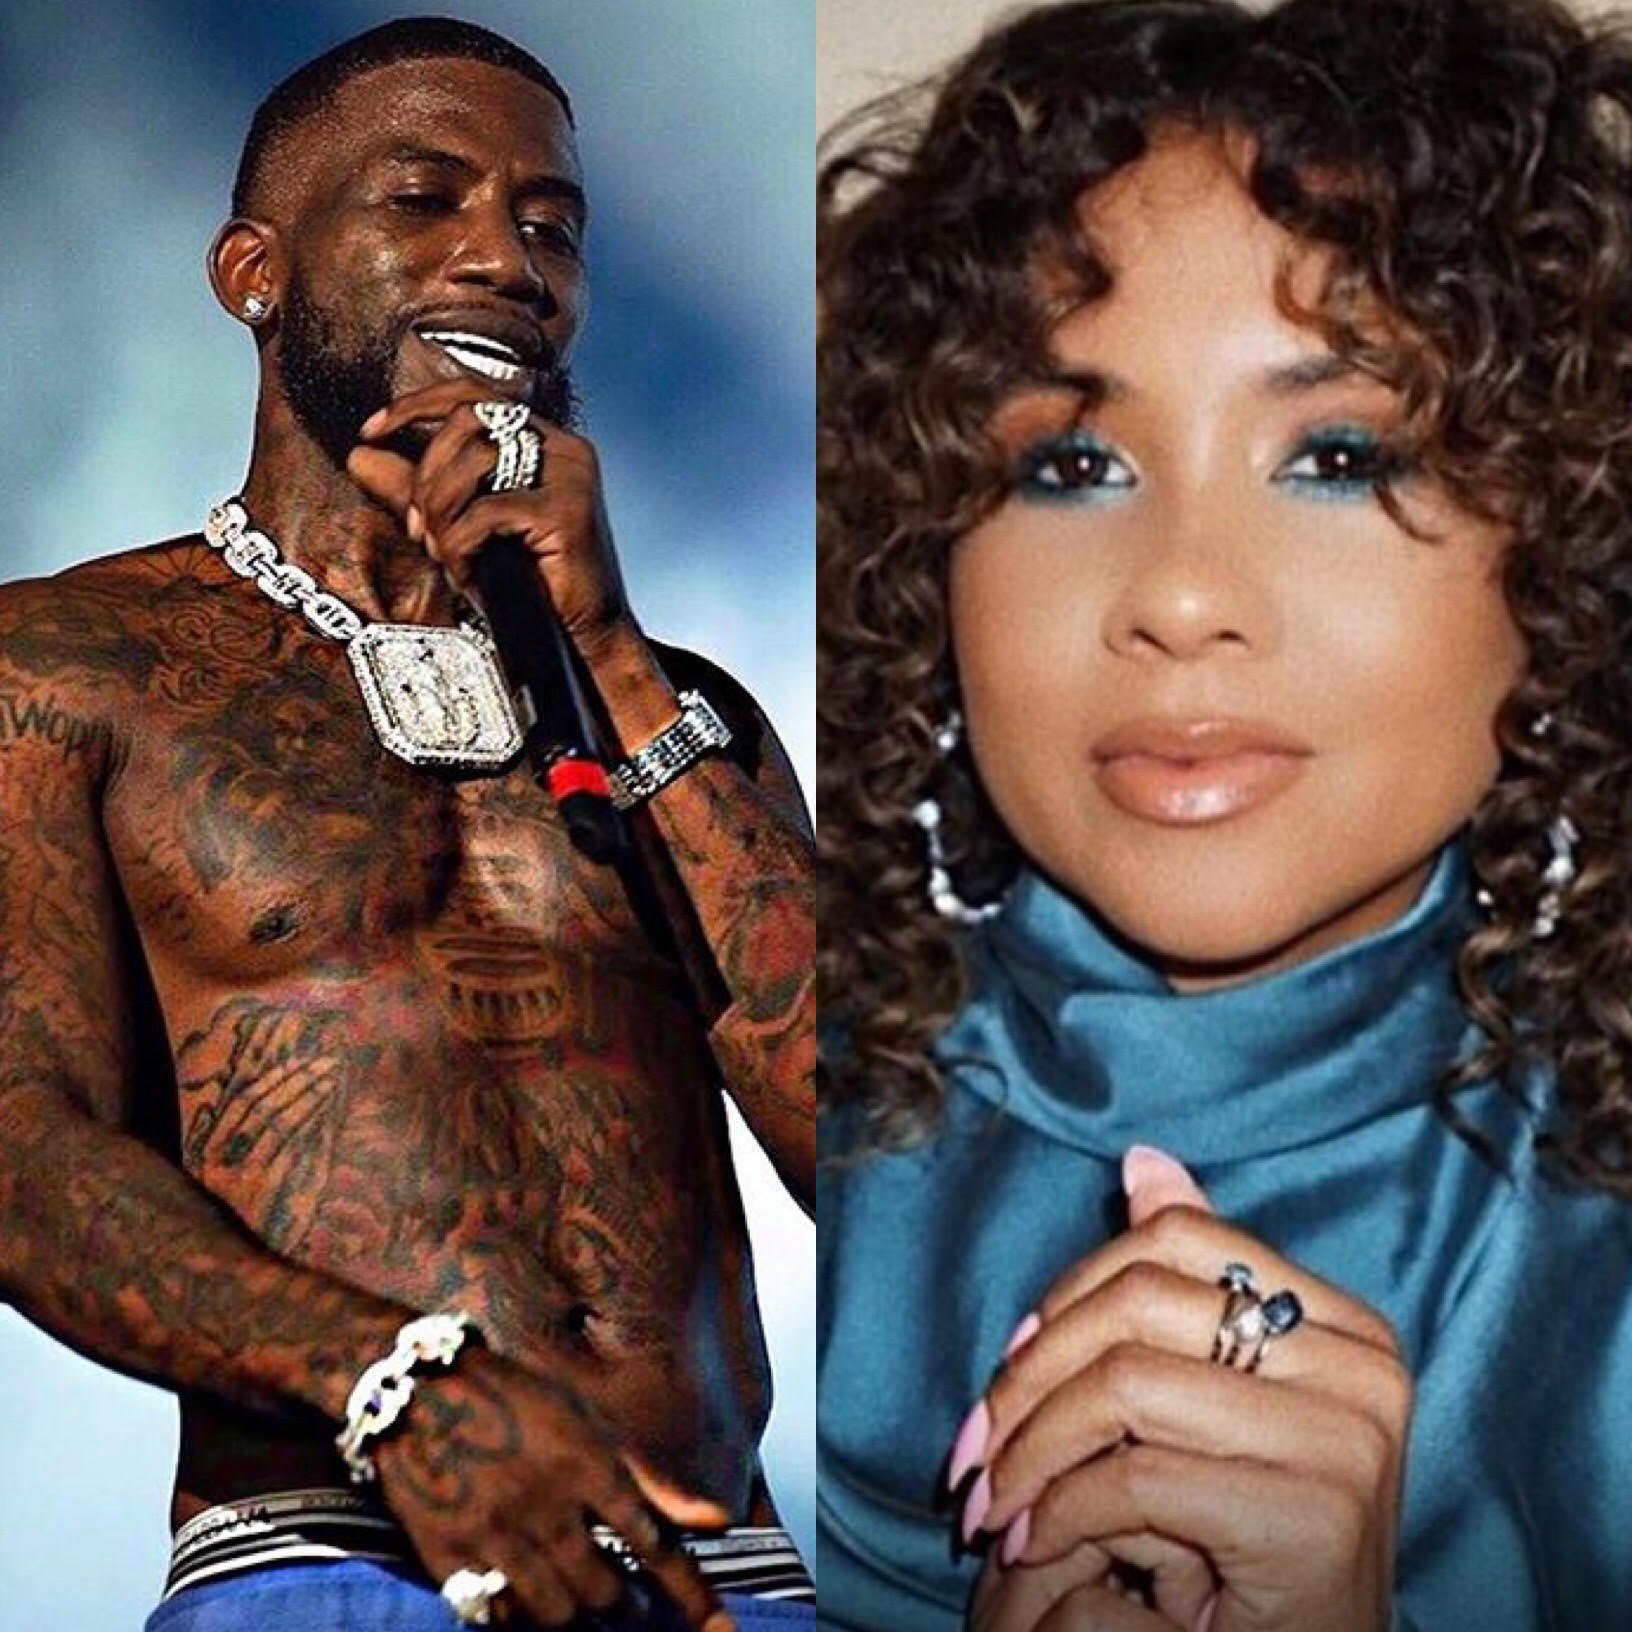 EXCLUSIVE: Gucci Mane's Fallout With Angela Yee Stems From Yo Gott...